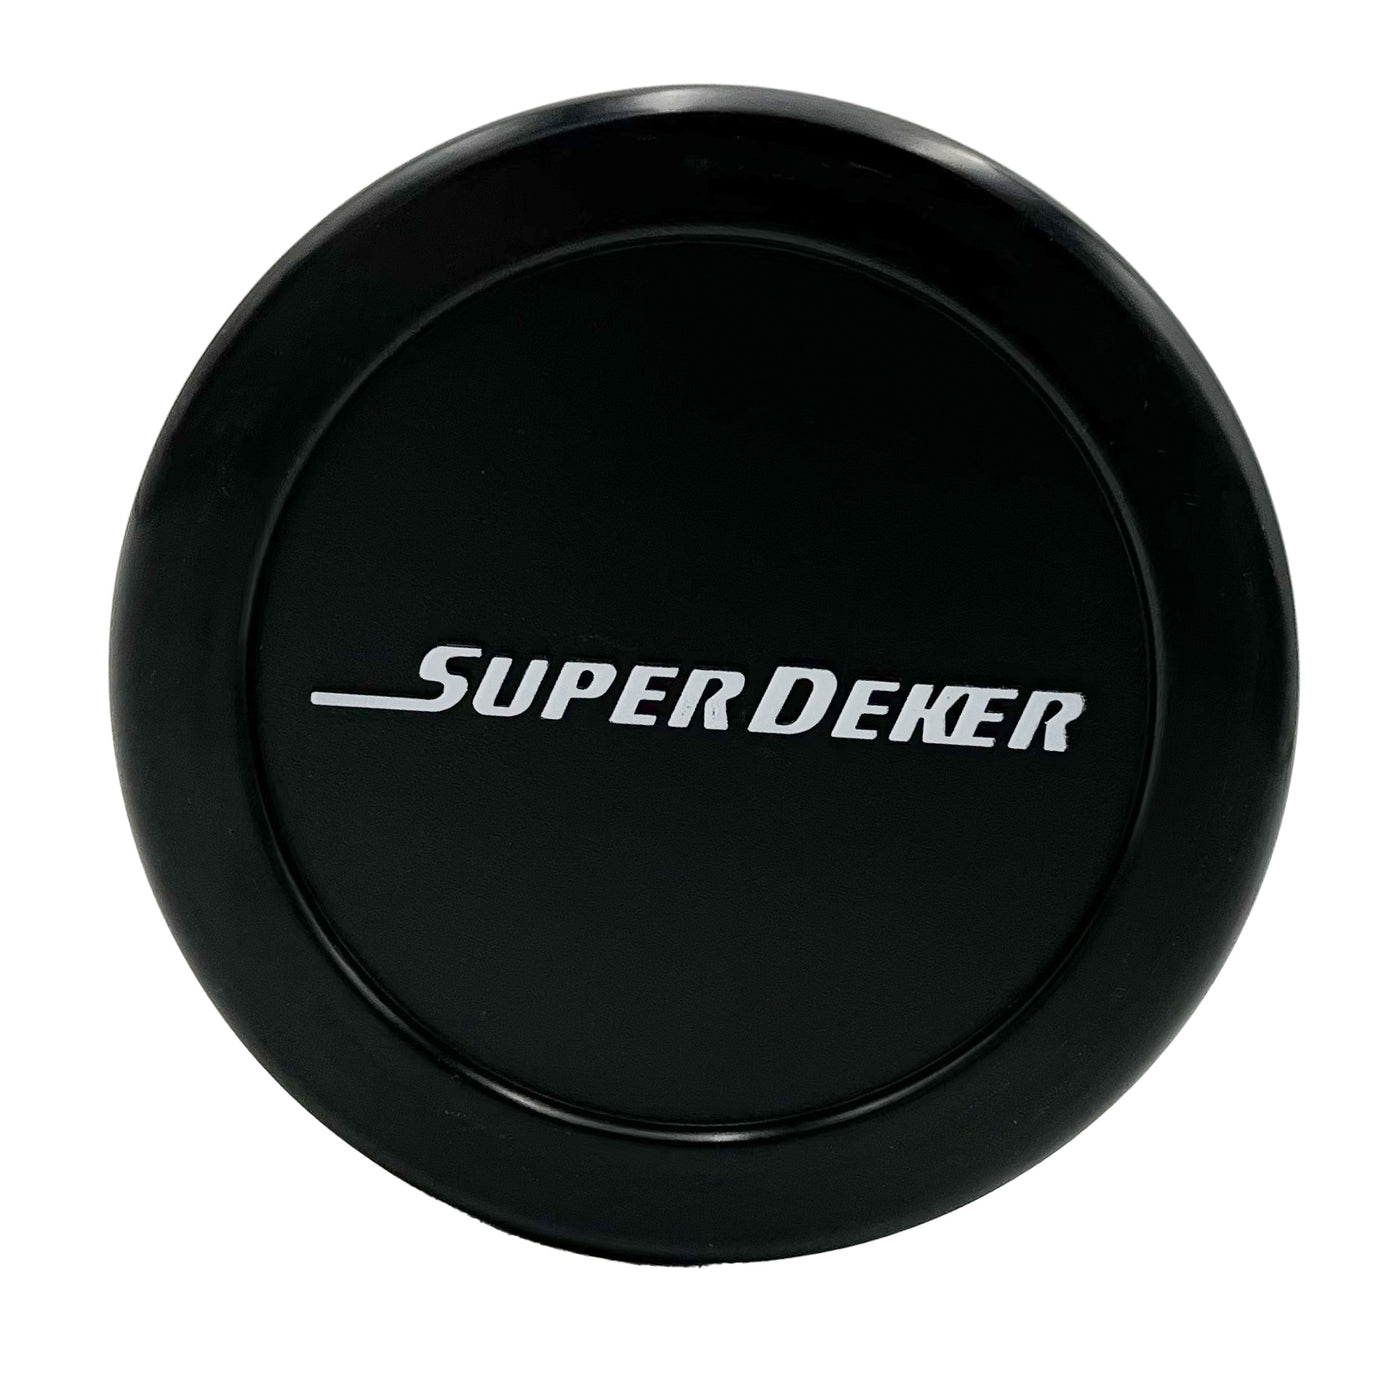 The SuperDeker ePuck is the perfect hockey stickhandling training aid for SuperDeker because it feels like a real puck with the same weight and slickness!